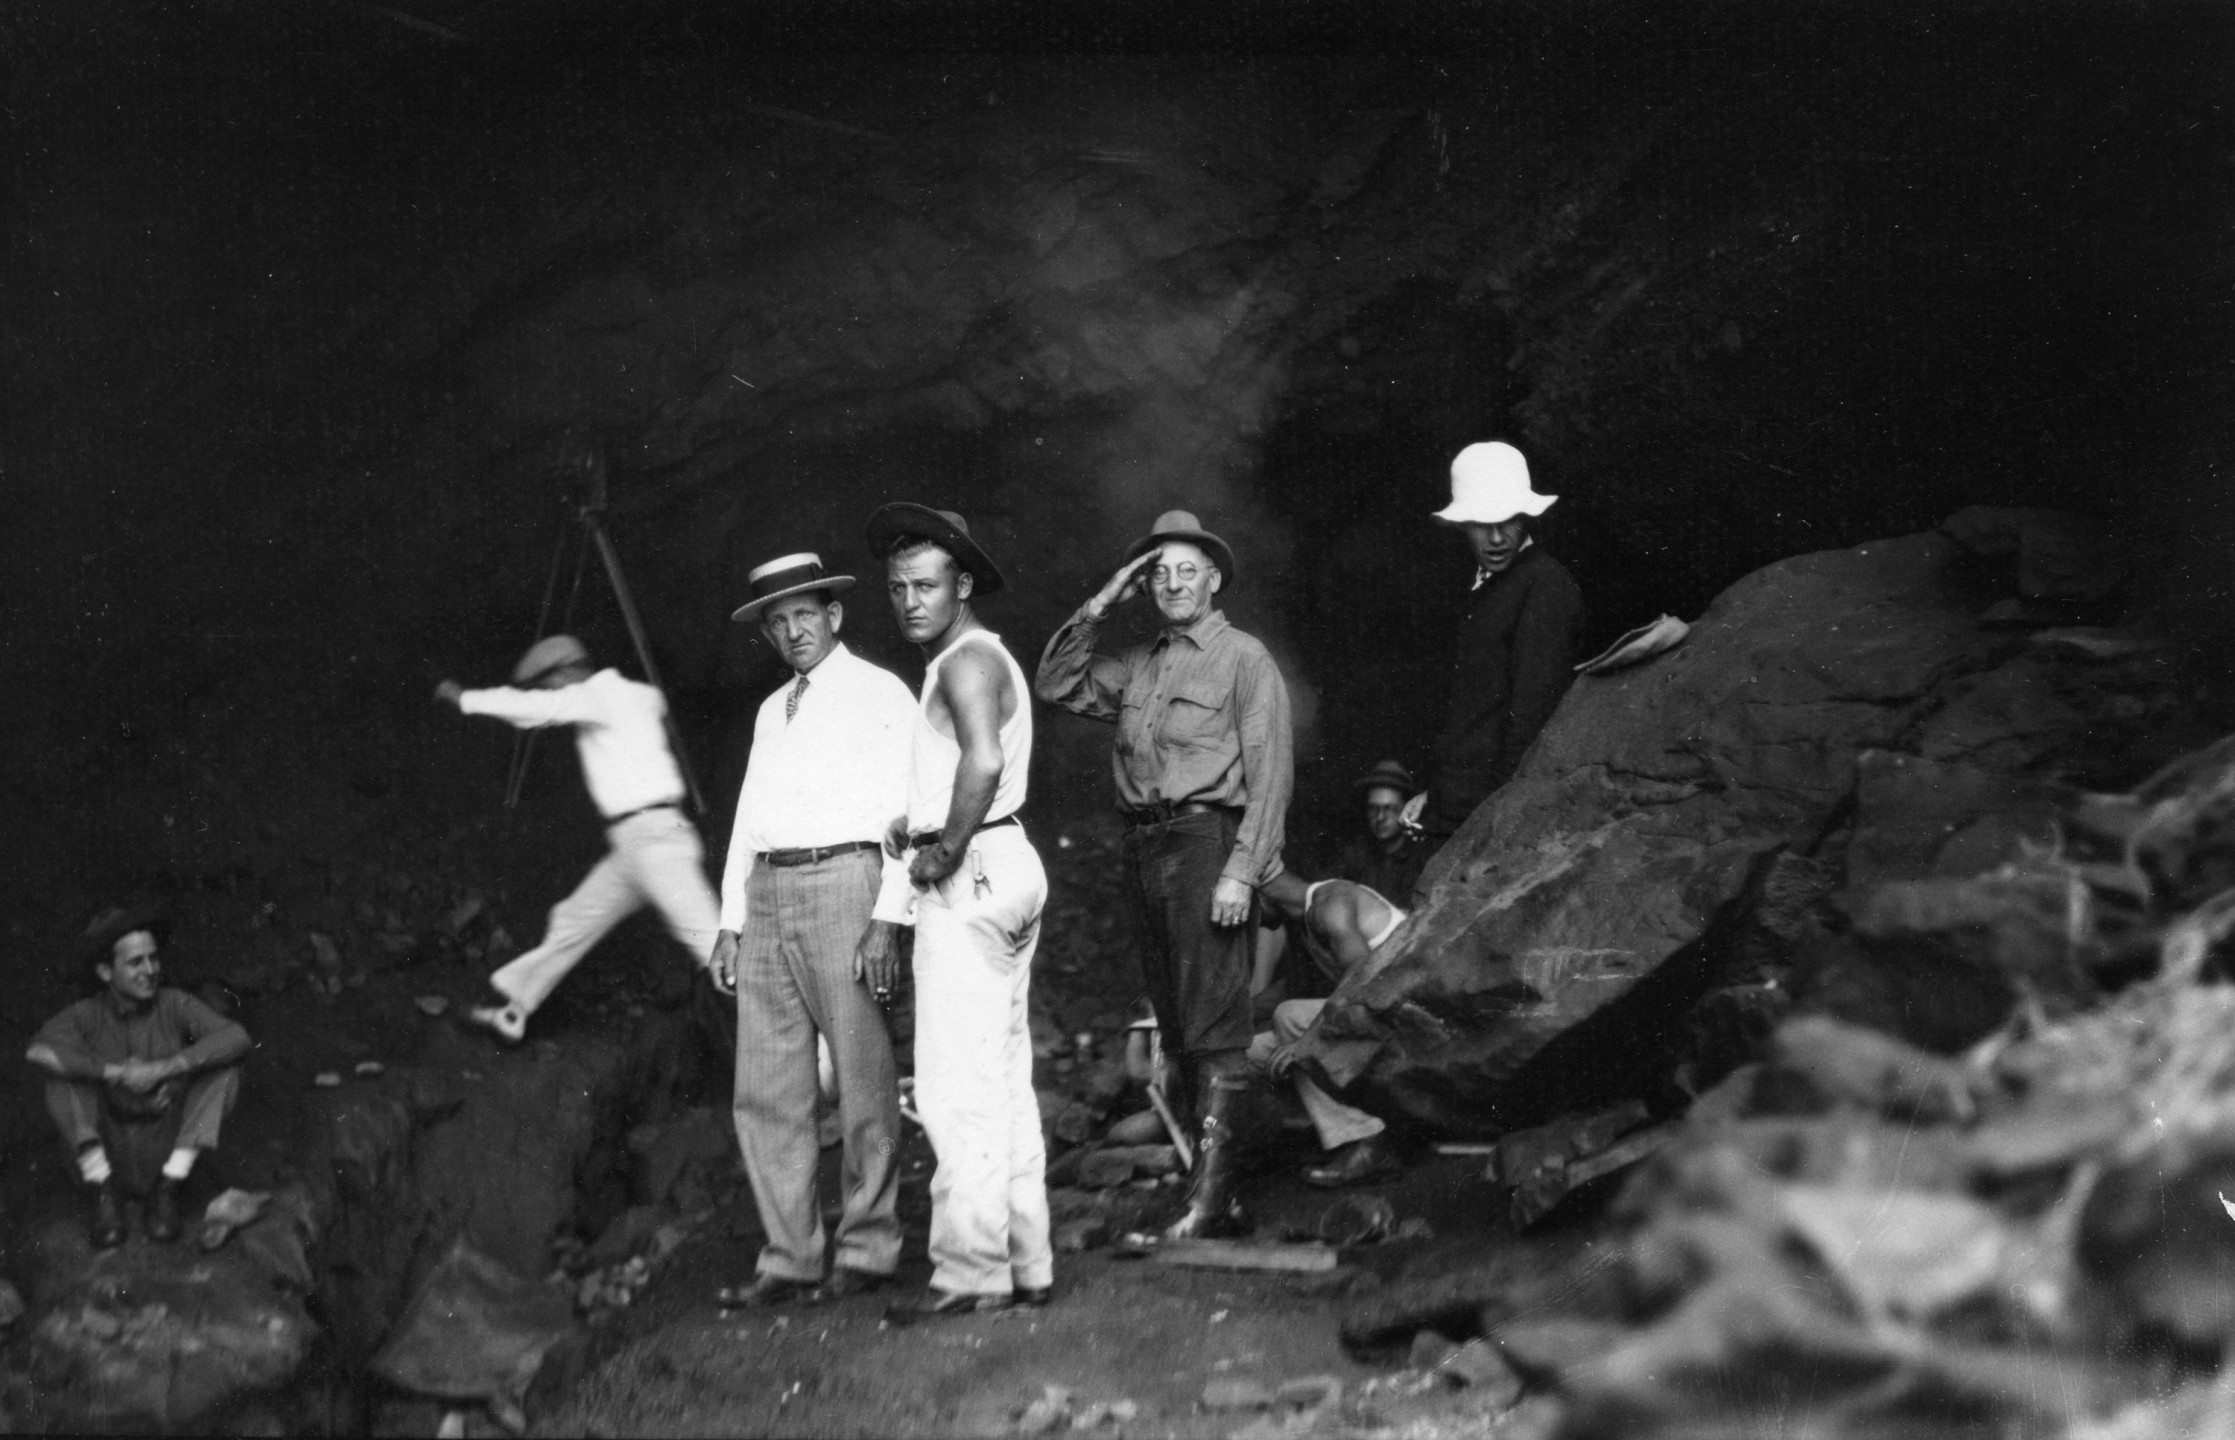 Dr. Harry on expedition to Galápagos Islands